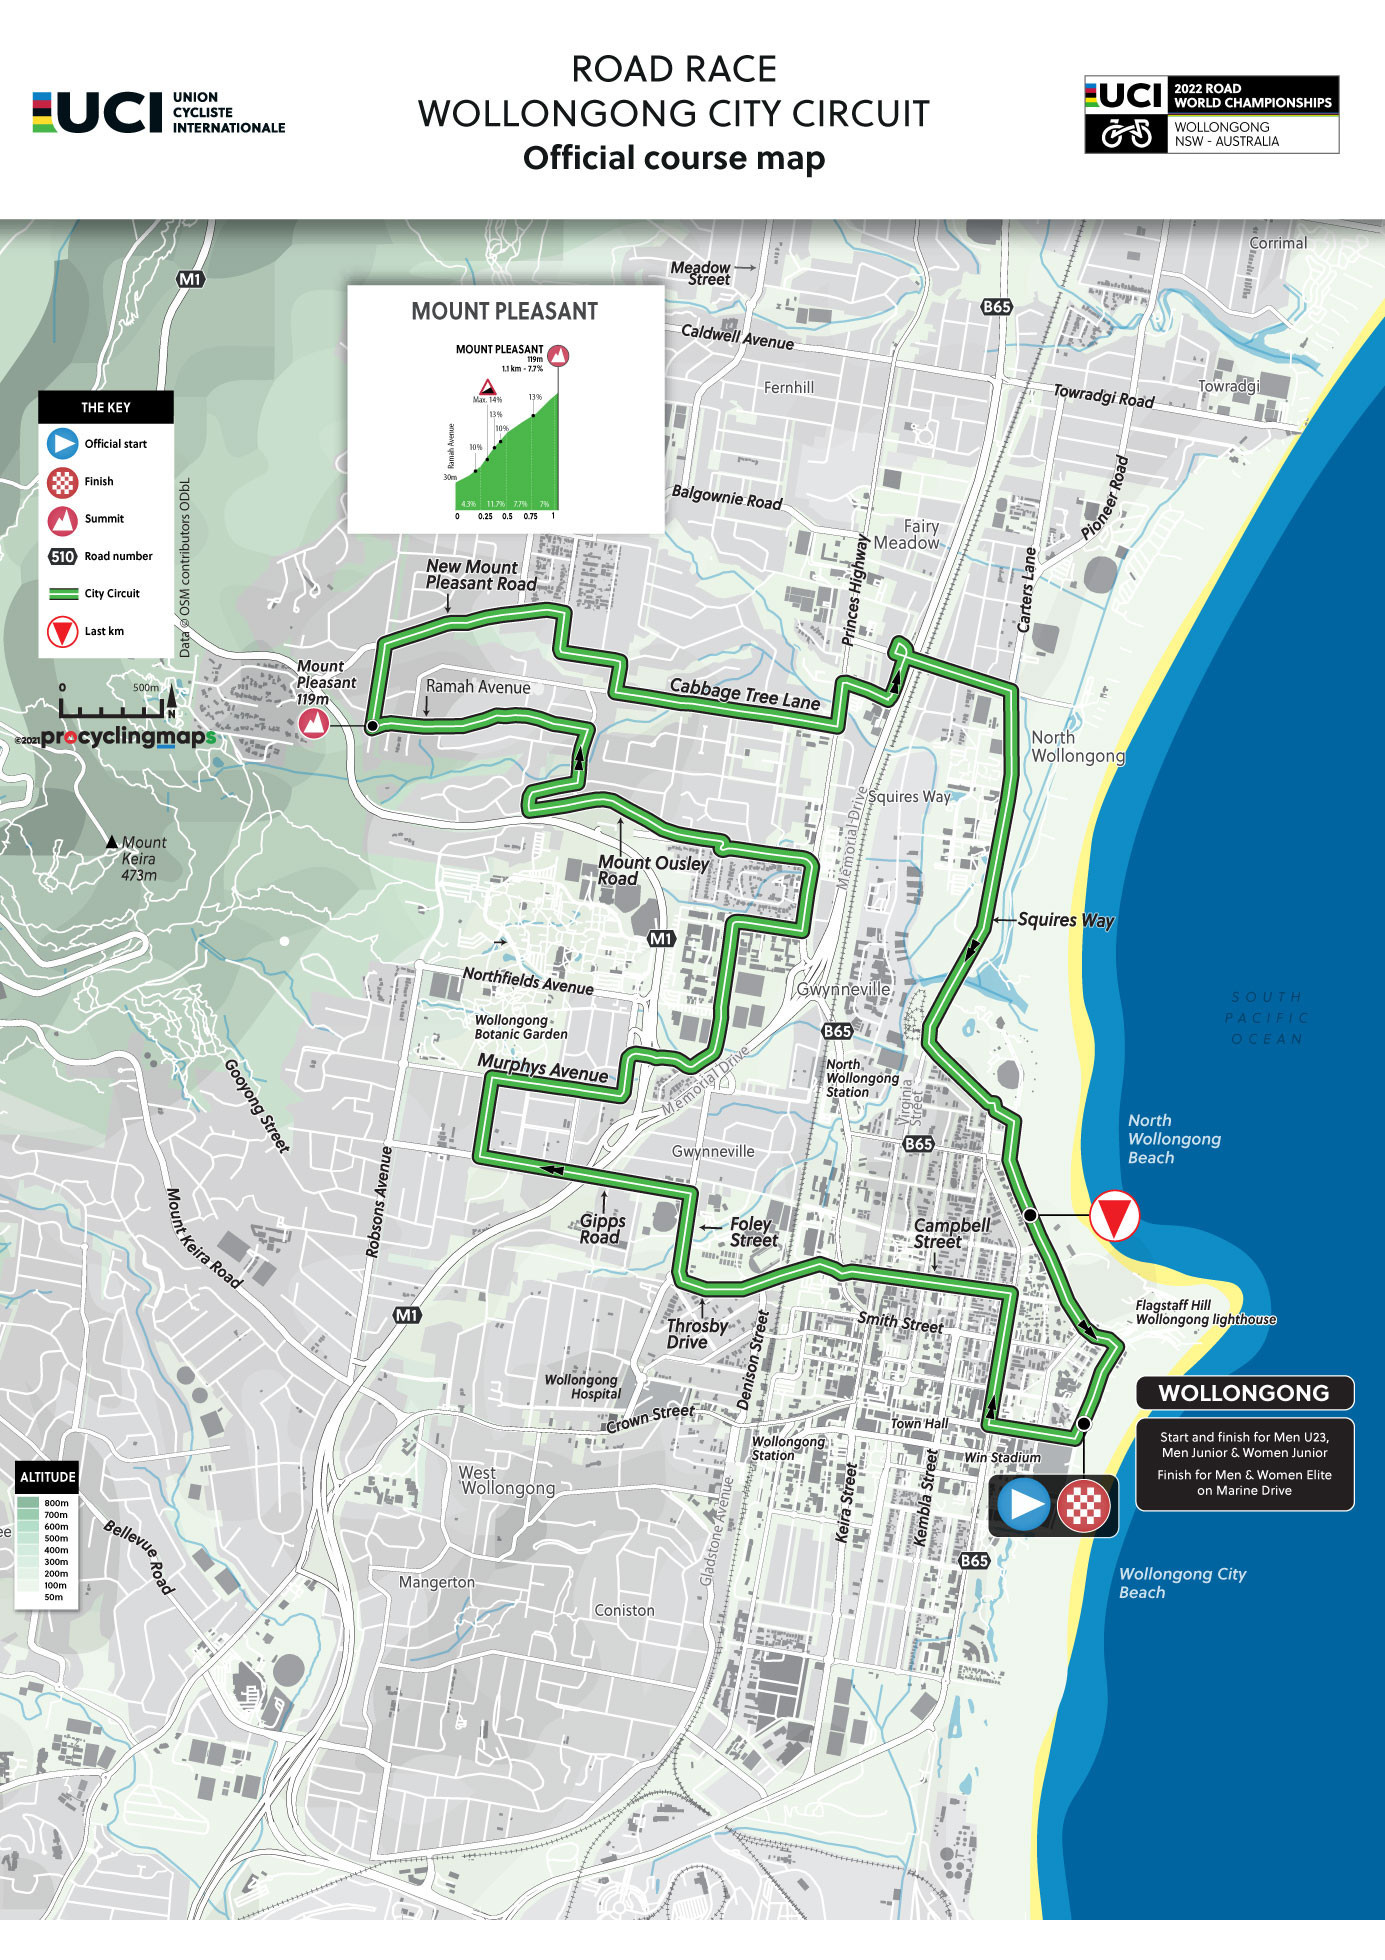 The city loop circuit in Wollongong features 33 corners and a 1.1km Mount Pleasant climb ©2022 UCI Road World Championships Wollongong